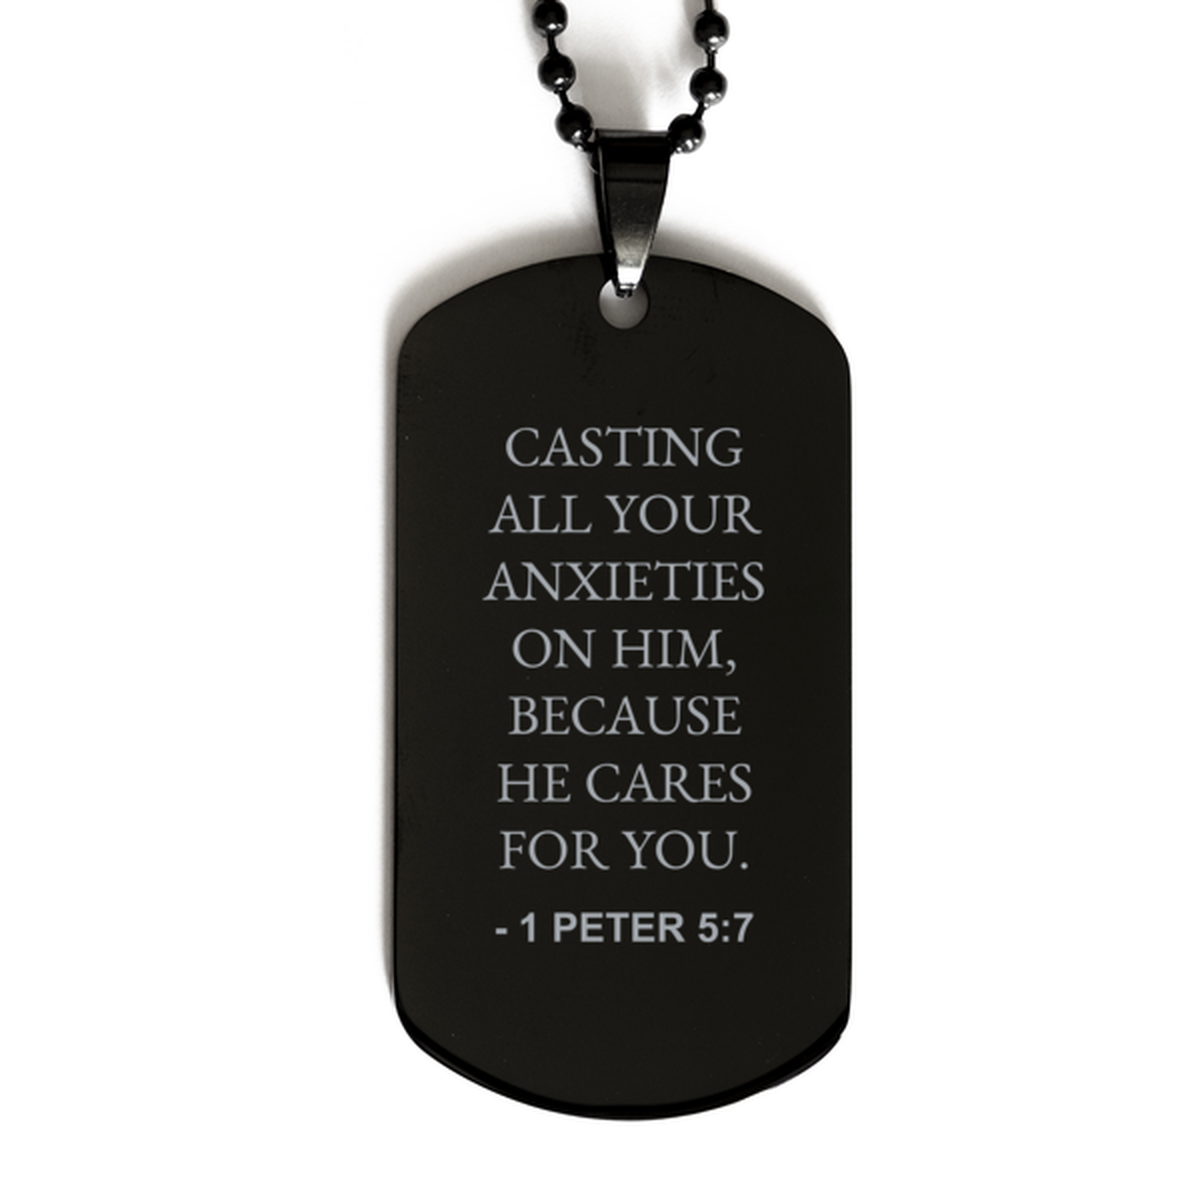 Bible Verse Black Dog Tag, 1 Peter 5:7 Casting All Your Anxieties On Him, Because He, Christian Inspirational Necklace Gifts For Men Women